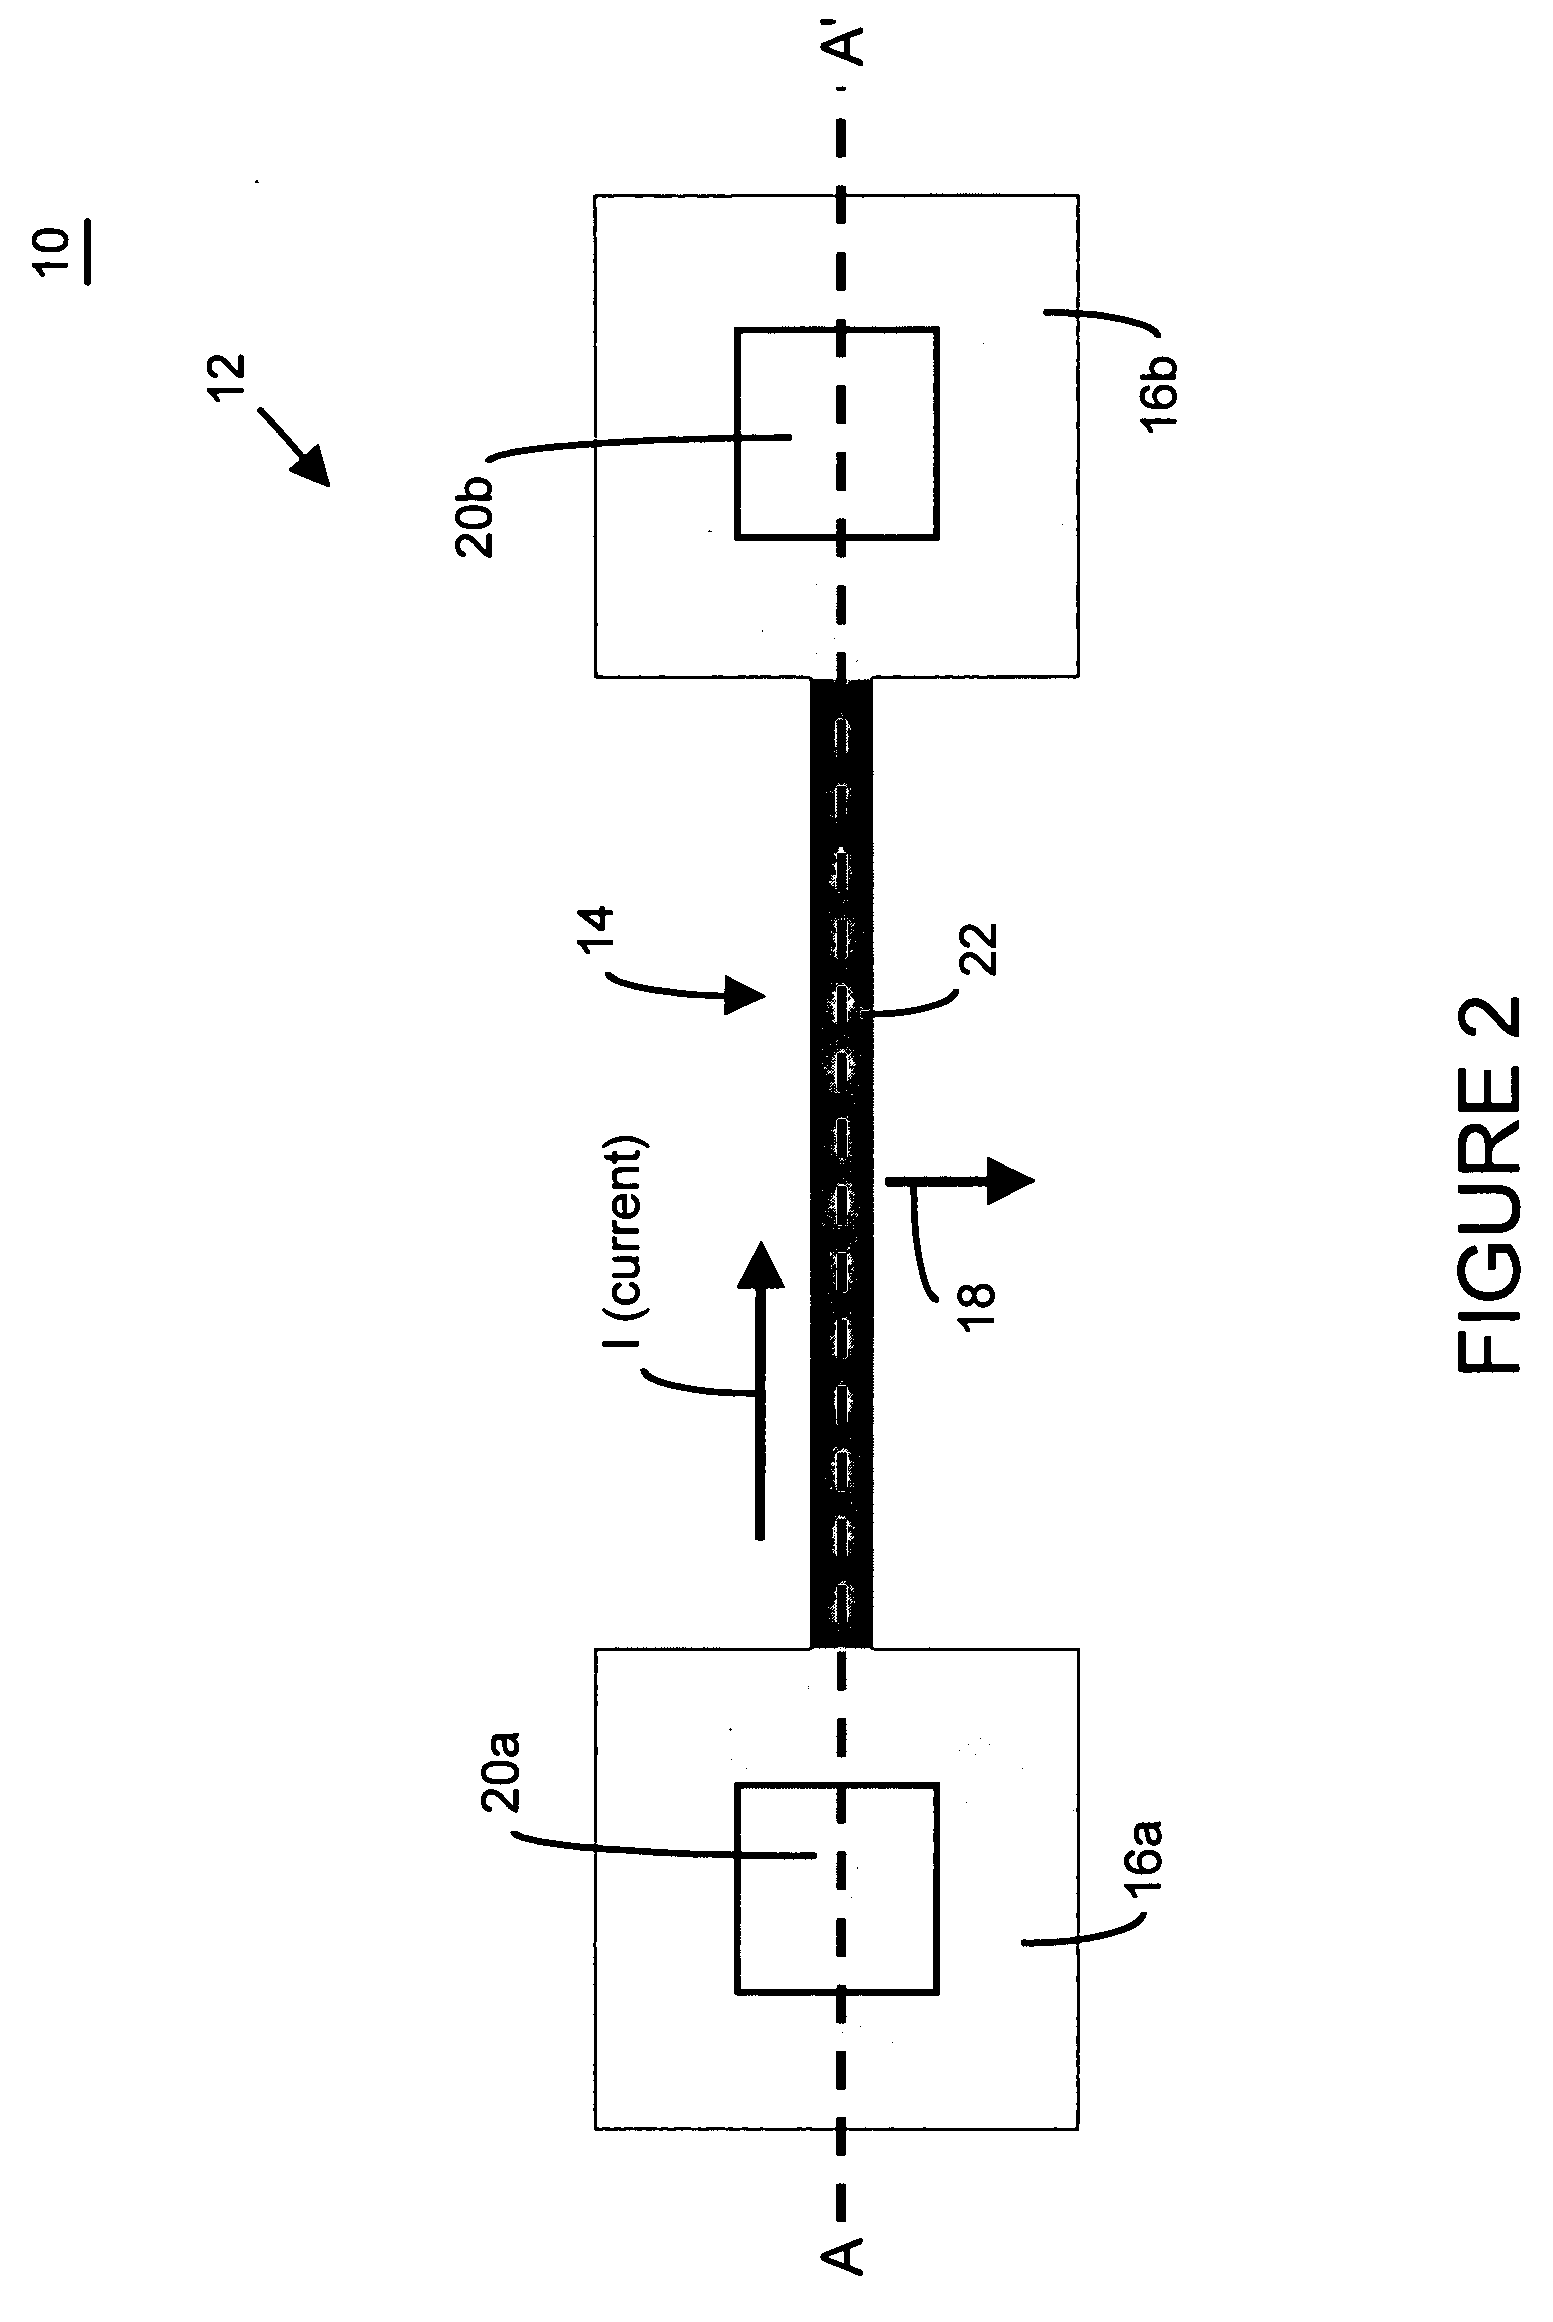 Temperature controlled MEMS resonator and method for controlling resonator frequency